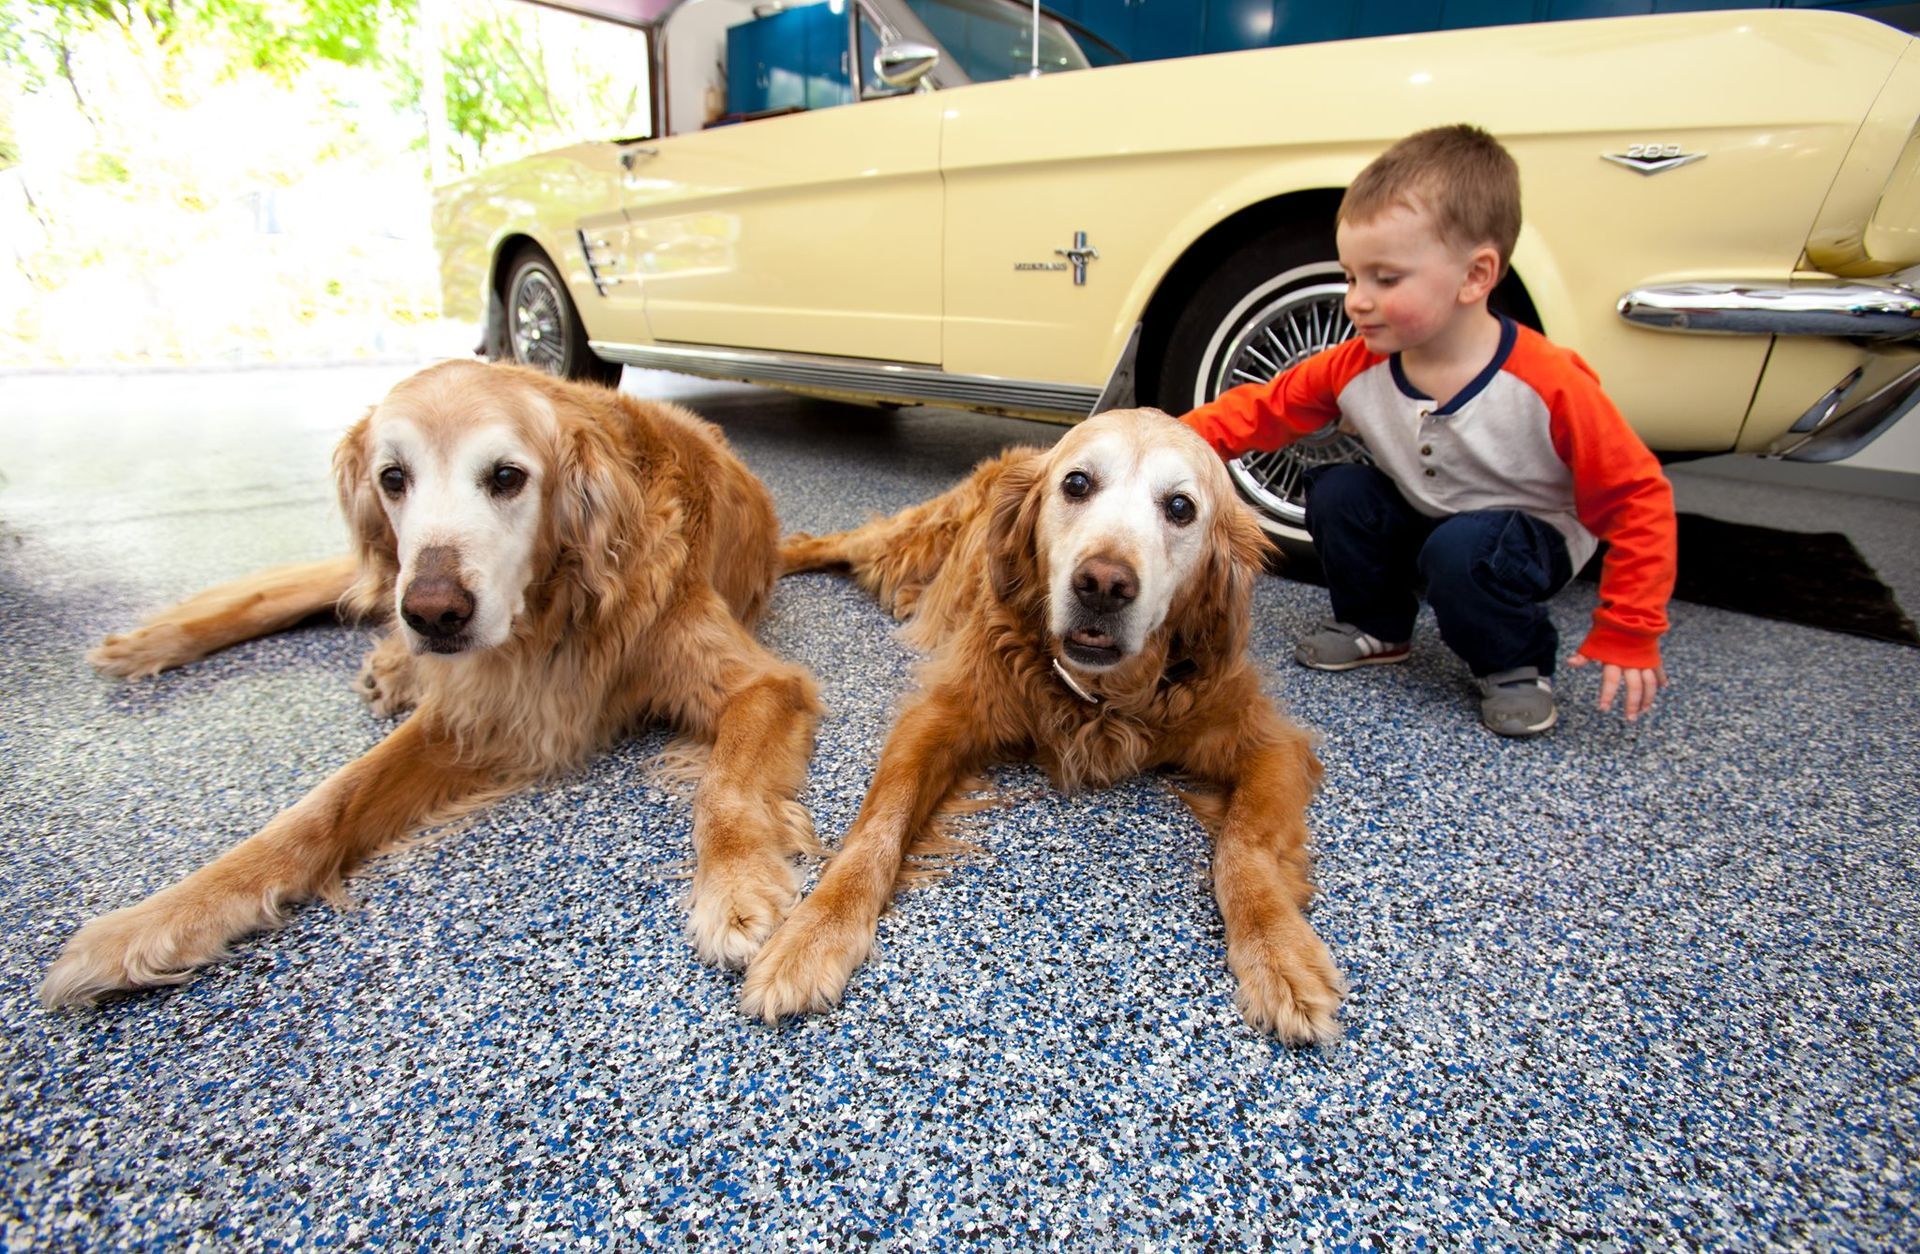 A child petting two dogs in front of a classic car parked on a new garage floor concrete coating